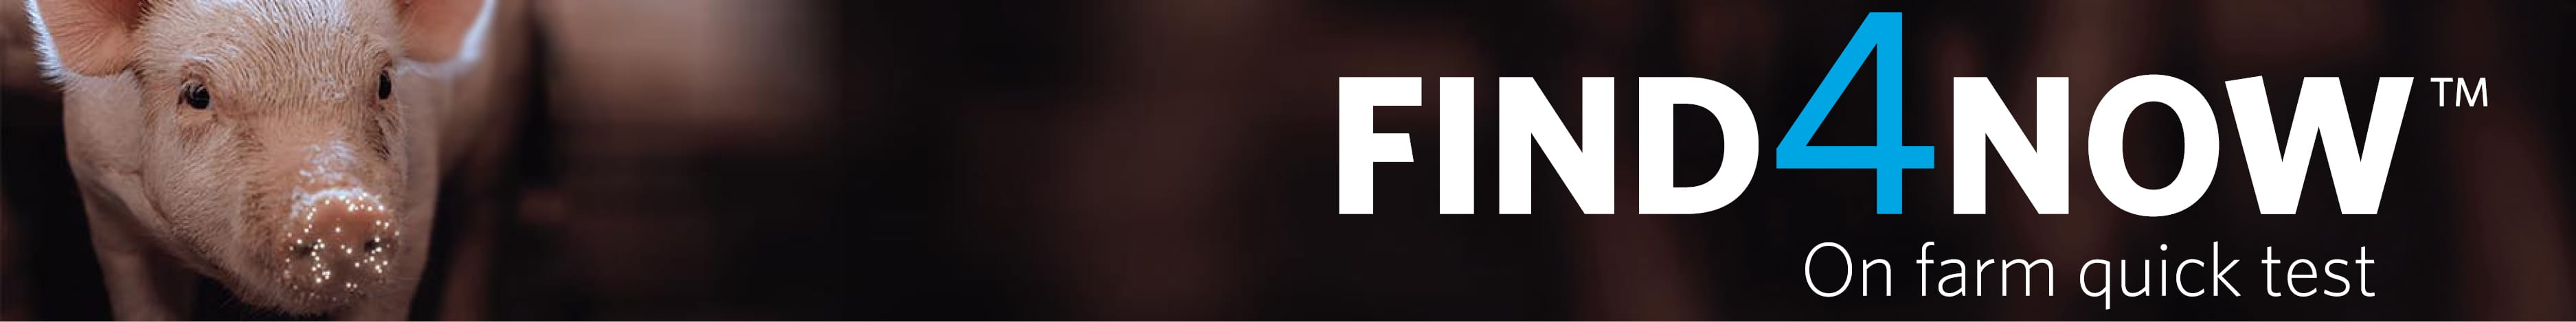 Find4Now English banner